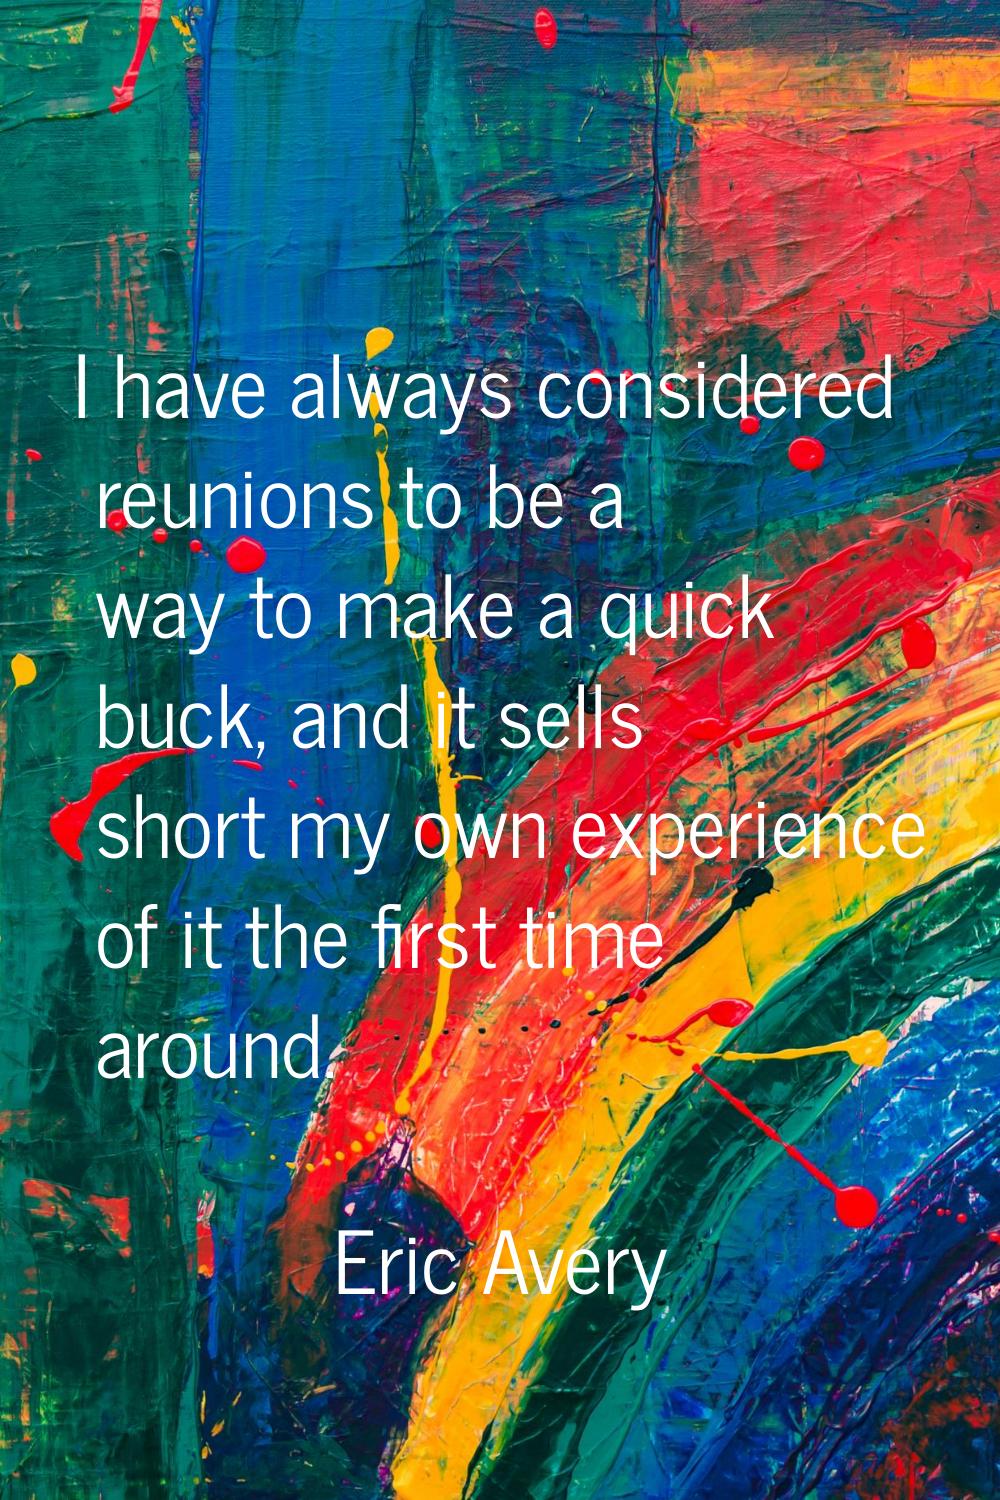 I have always considered reunions to be a way to make a quick buck, and it sells short my own exper